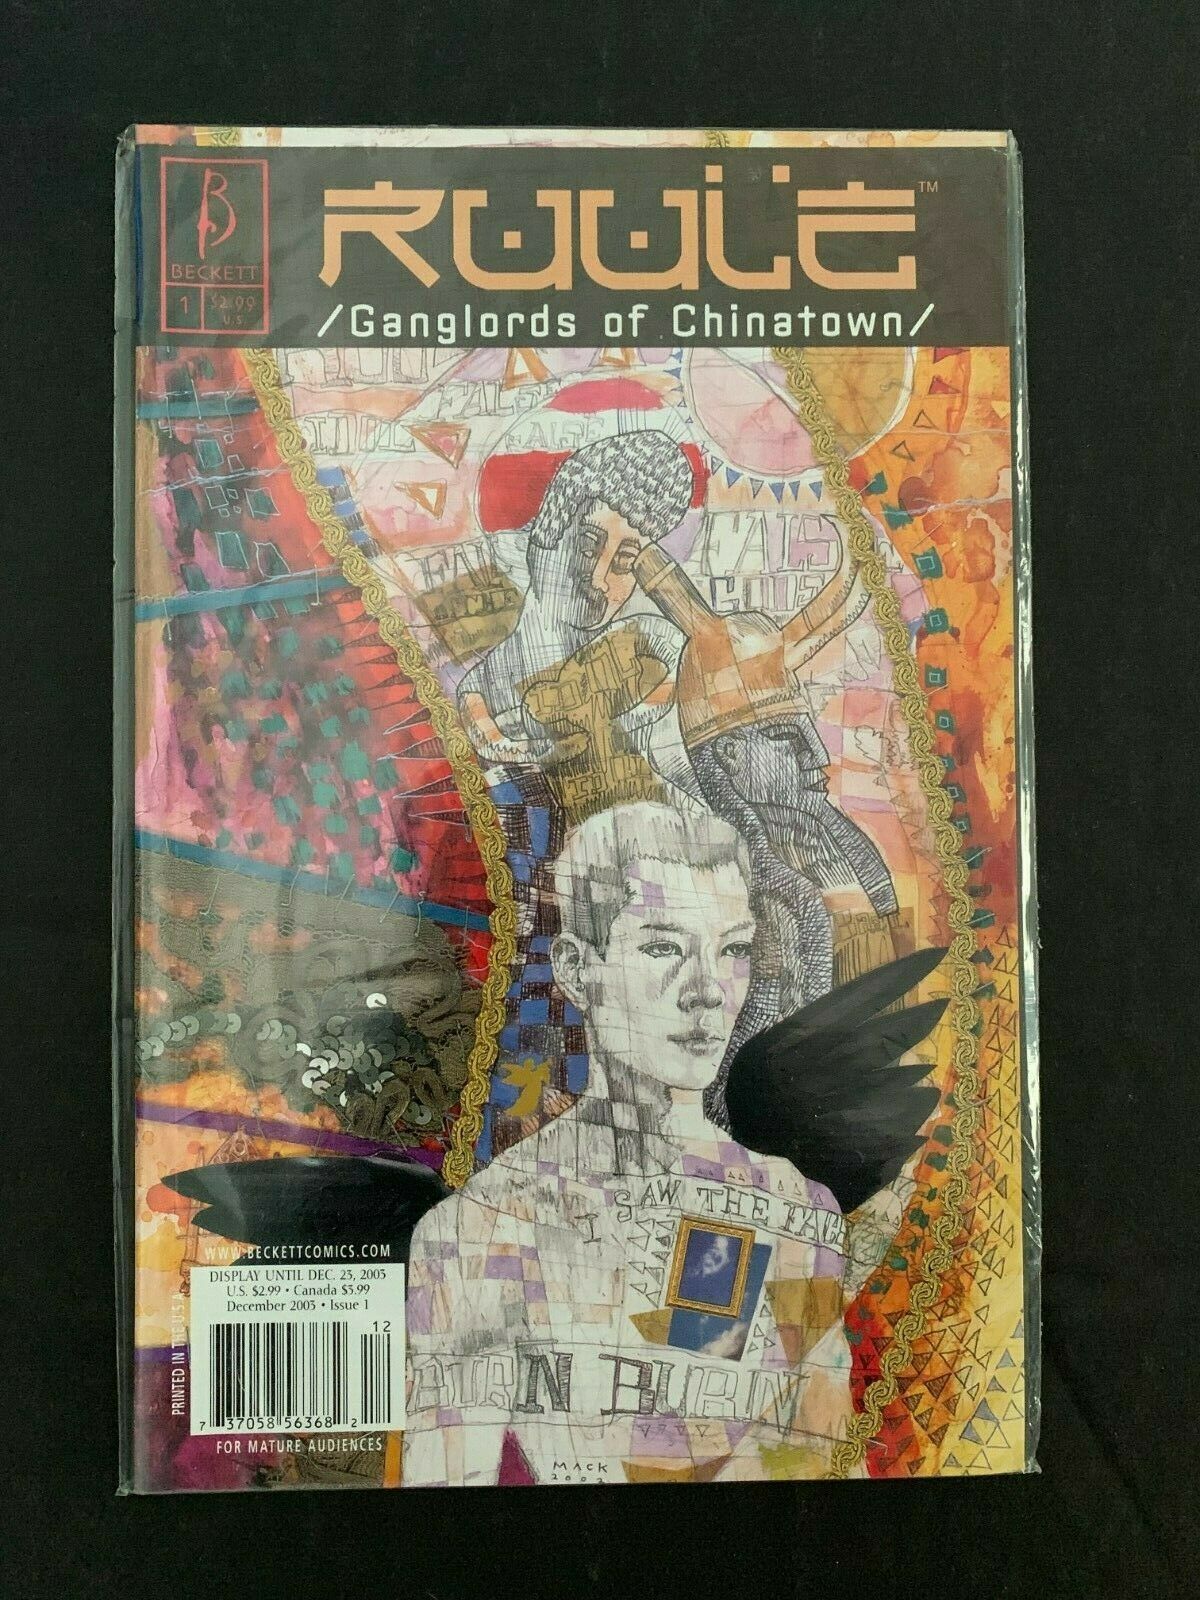 Ruule Ganglords Of Chinatown #1 Beckett Comics 2003 Nm+